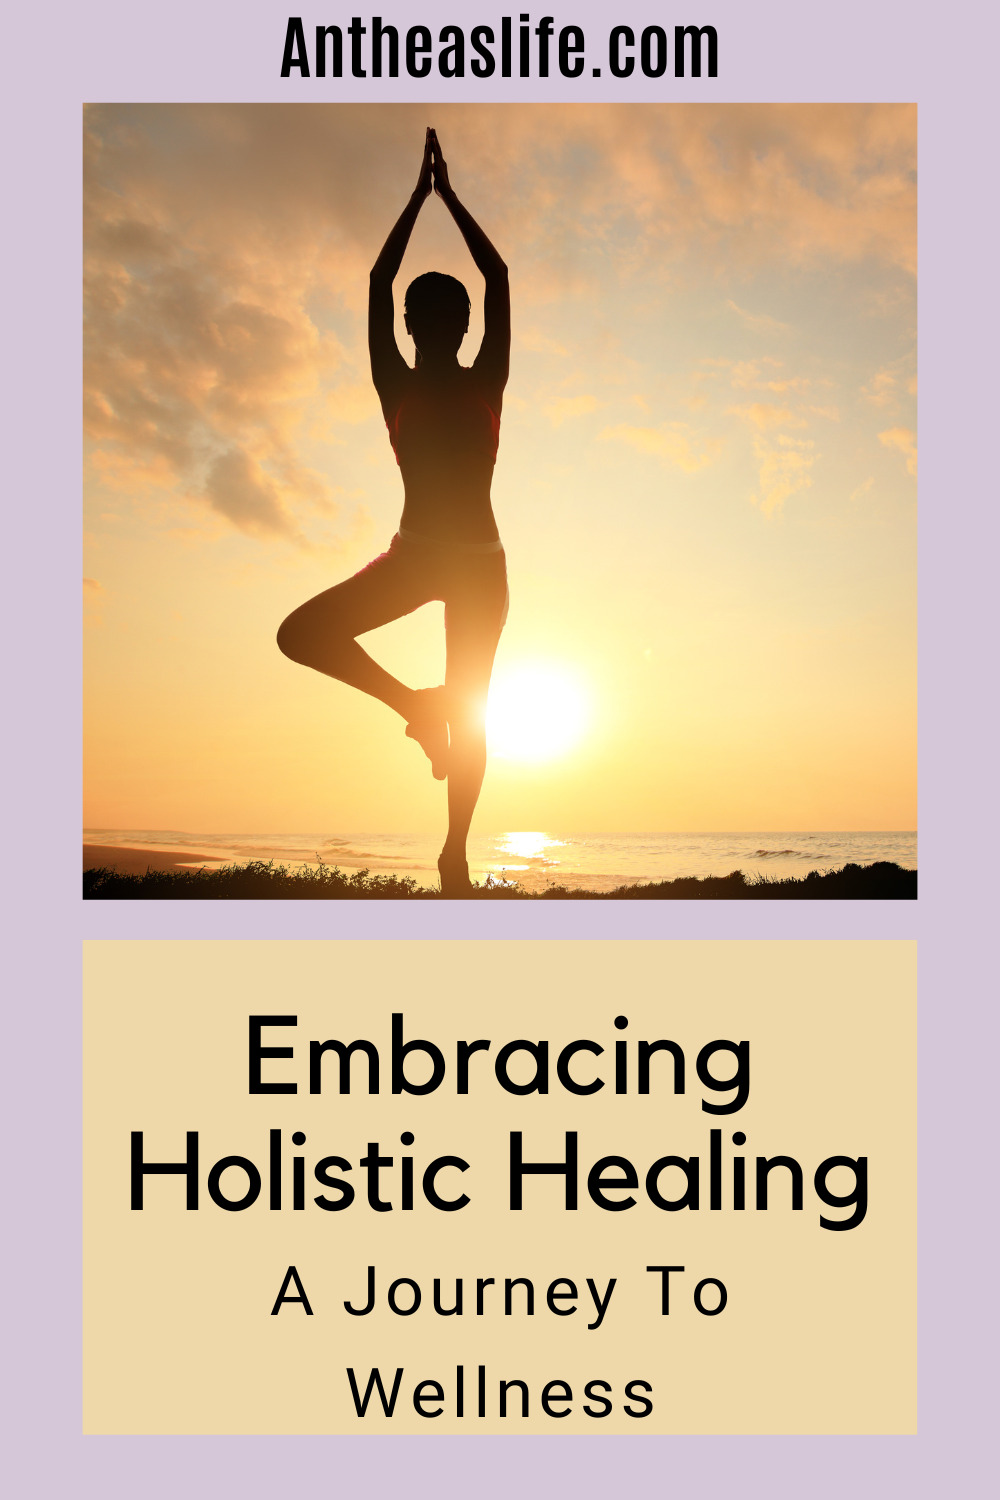 holistic healing practices